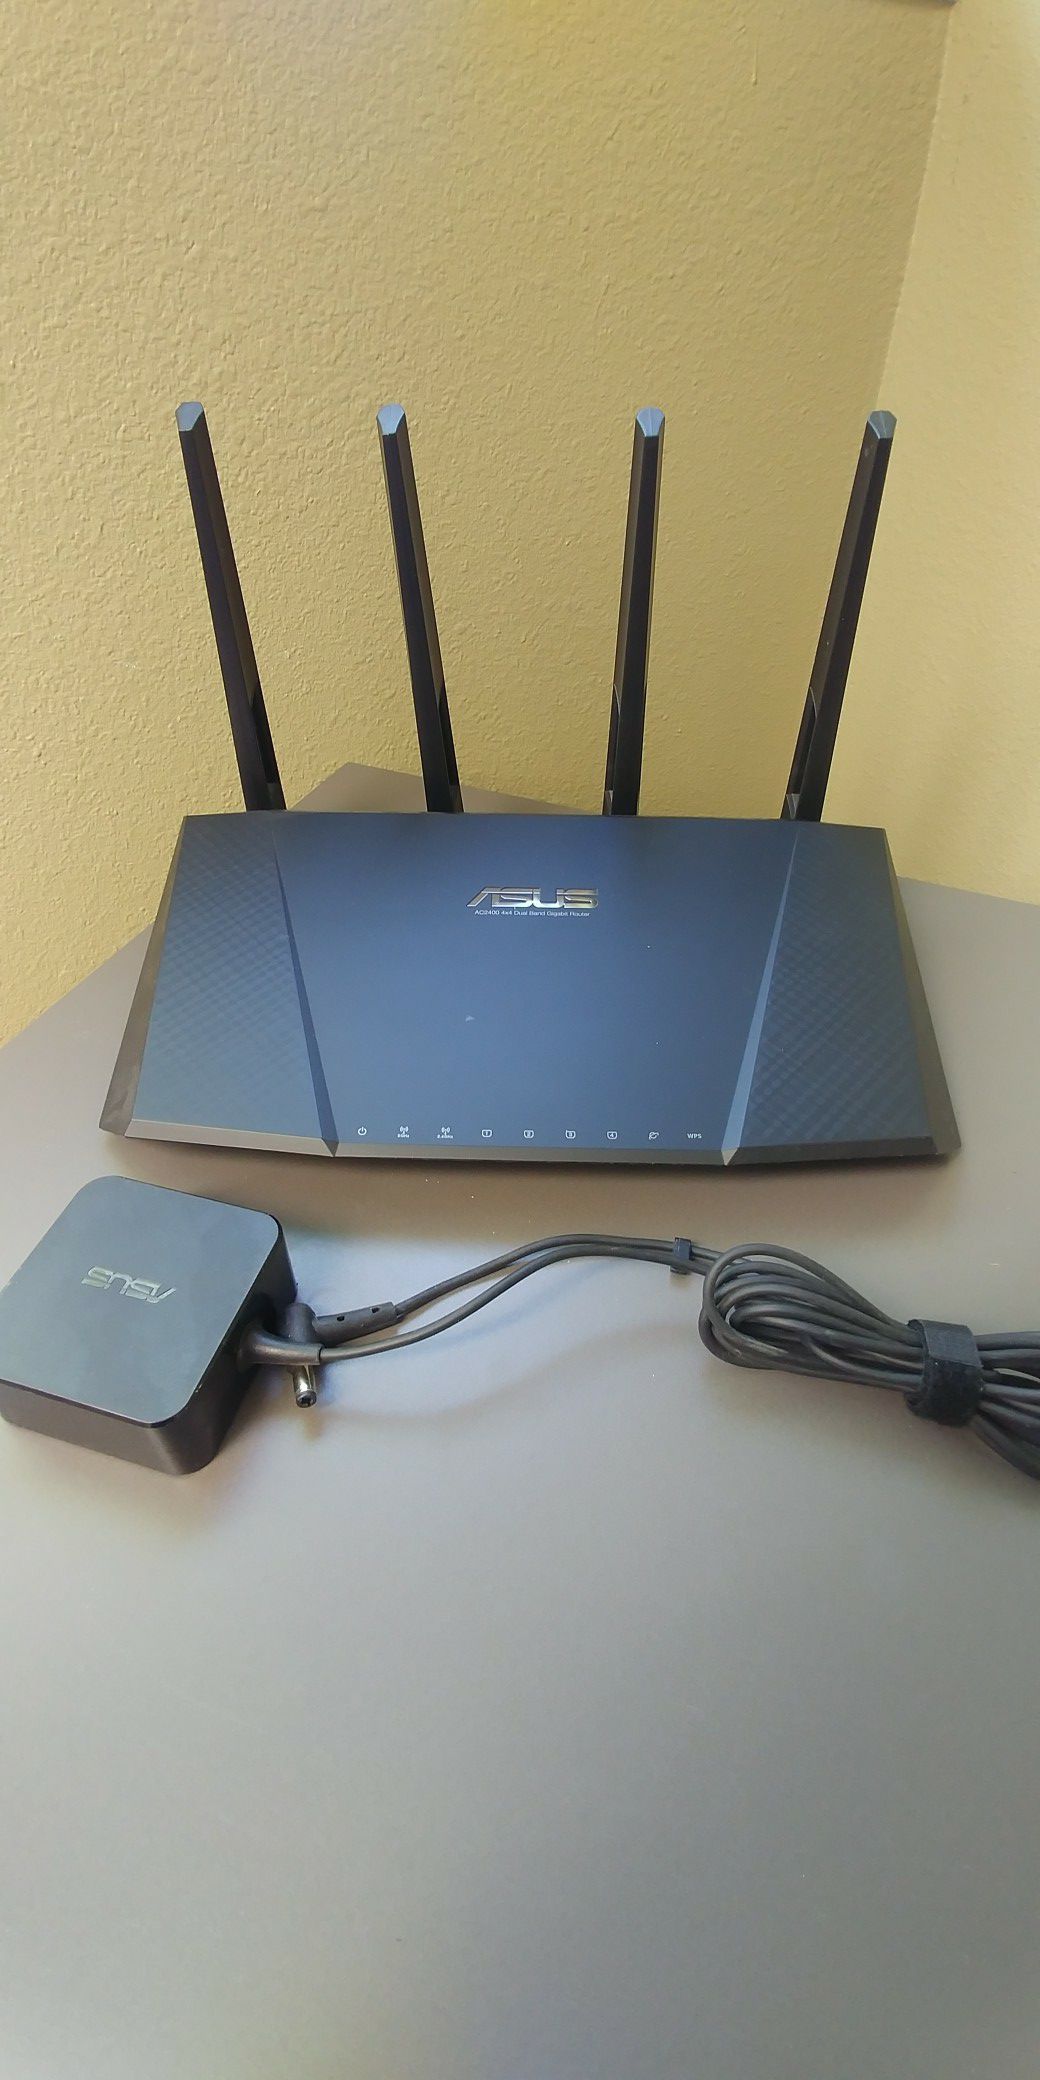 Asus wireless router ac2400 gigabit router